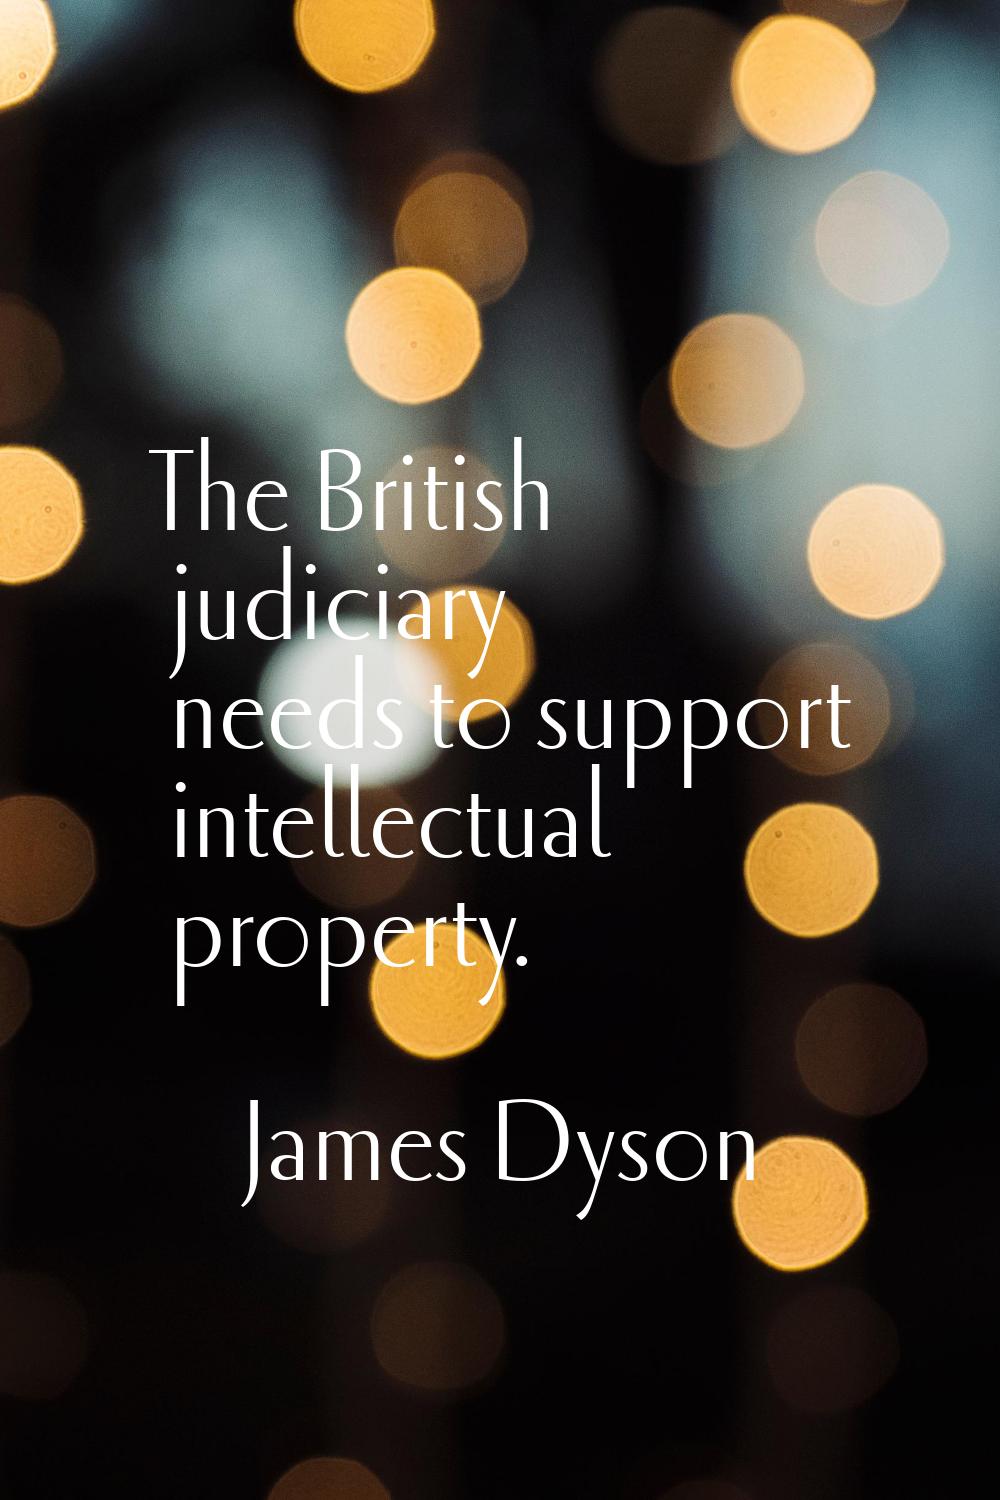 The British judiciary needs to support intellectual property.